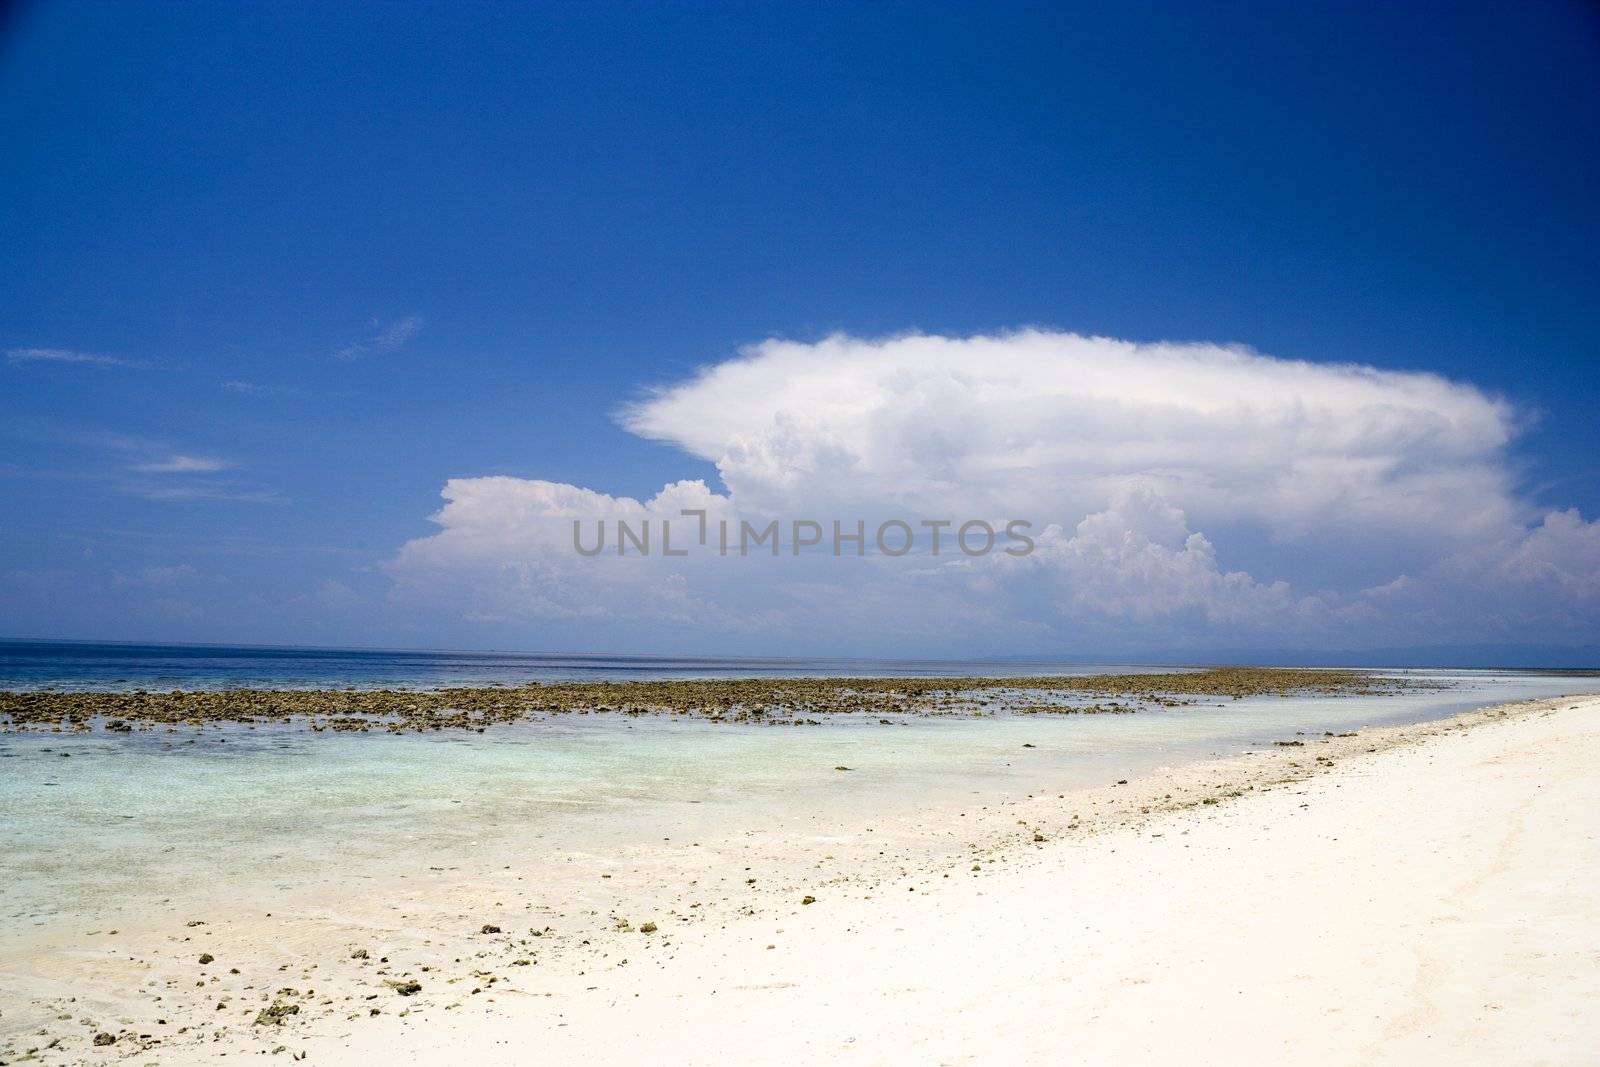 Image of a beach on a remote Malaysian tropical island.